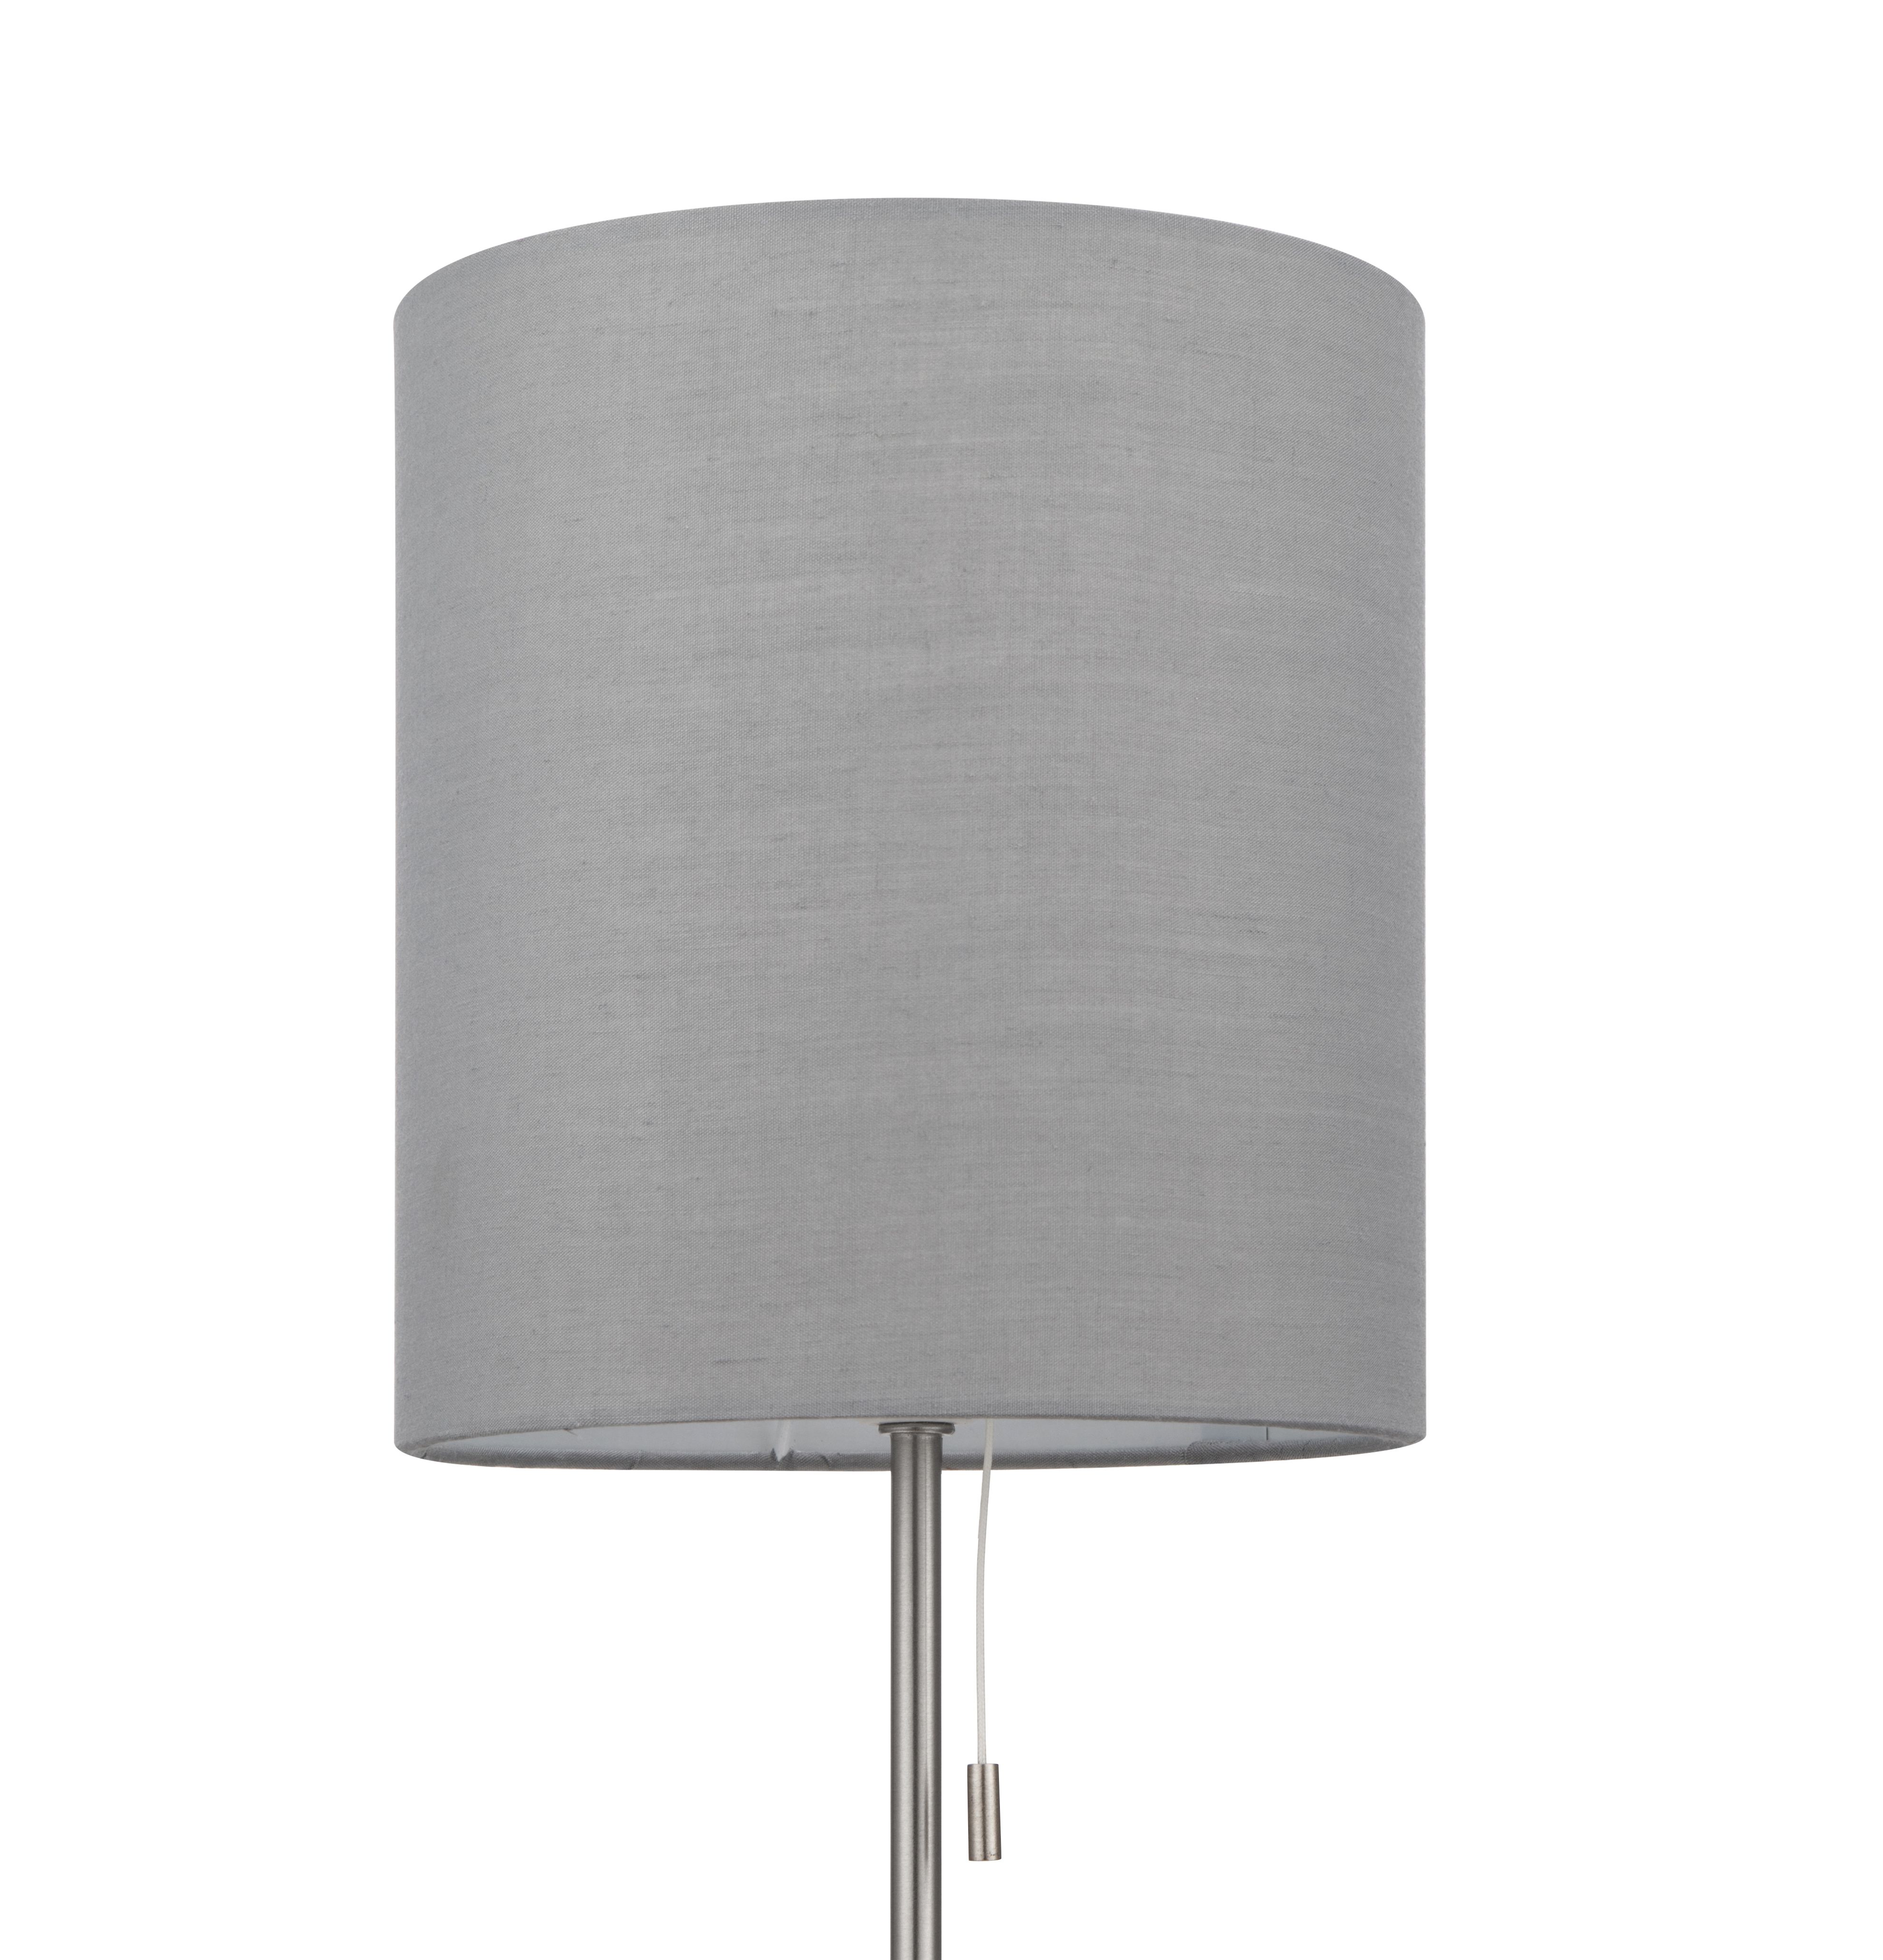 GoodHome Penistone Brushed Grey Chrome effect Straight Table lamp